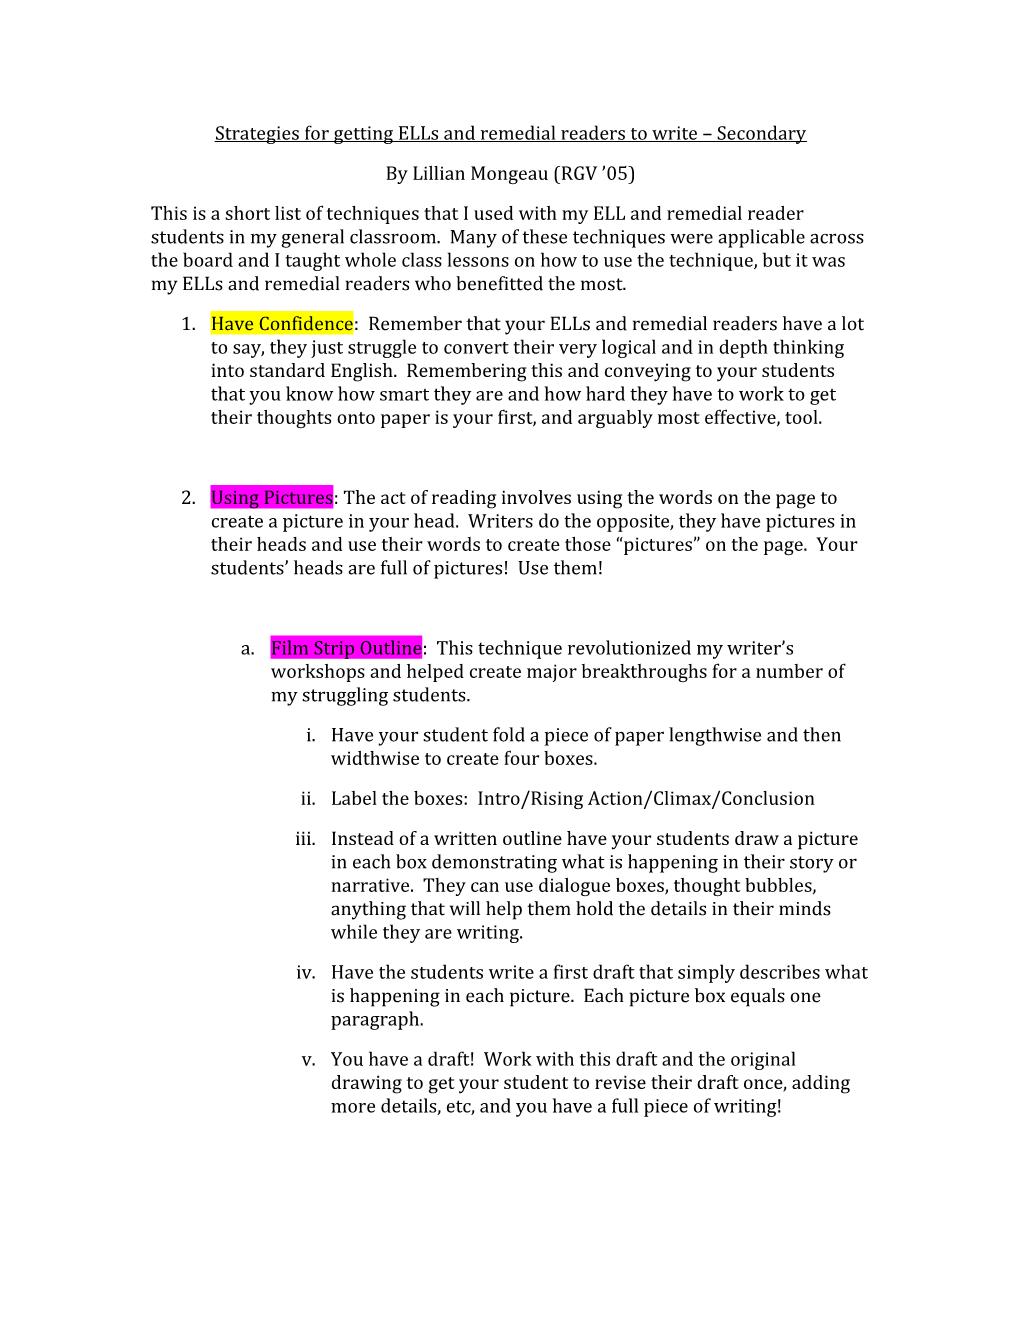 Strategies for Getting Ells and Remedial Readers to Write Secondary